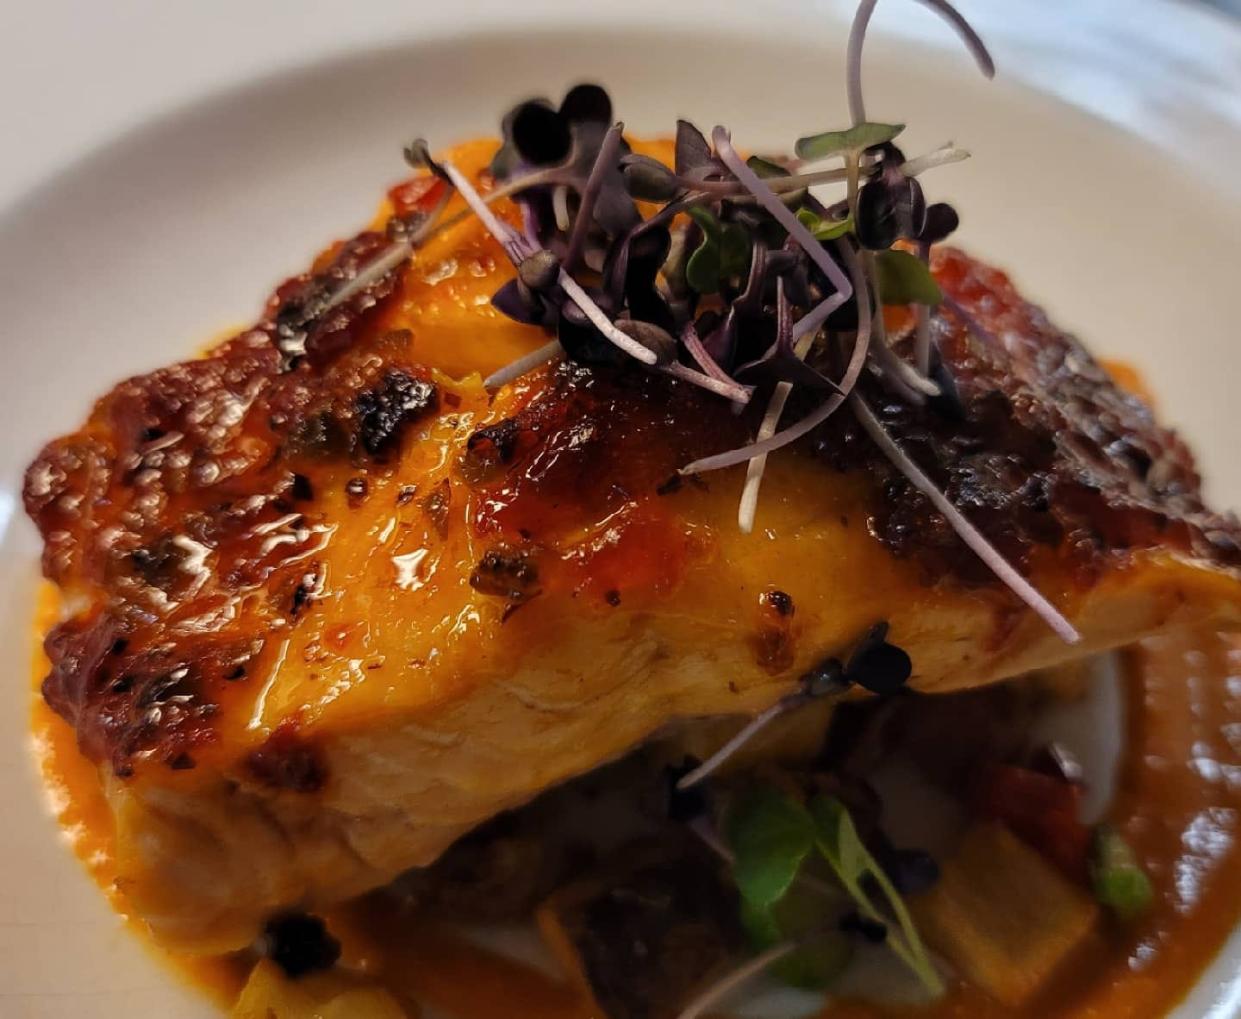 The menu at Citron Bistro in Hobe Sound features a hot pepper-bacon jam-crusted salmon with potato hash, asparagus and red pepper sauce.